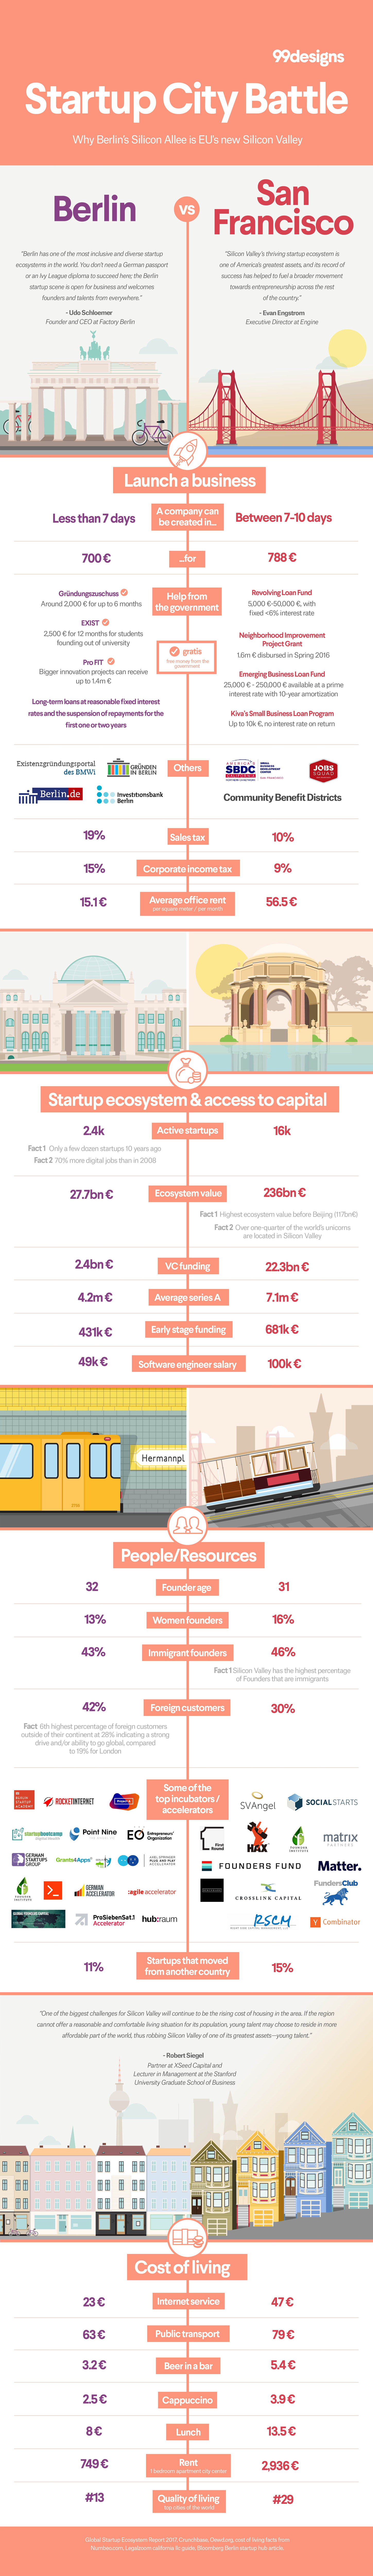 Why Berlin’s Silicon Allee is Europe’s New Silicon Valley [Infographic]